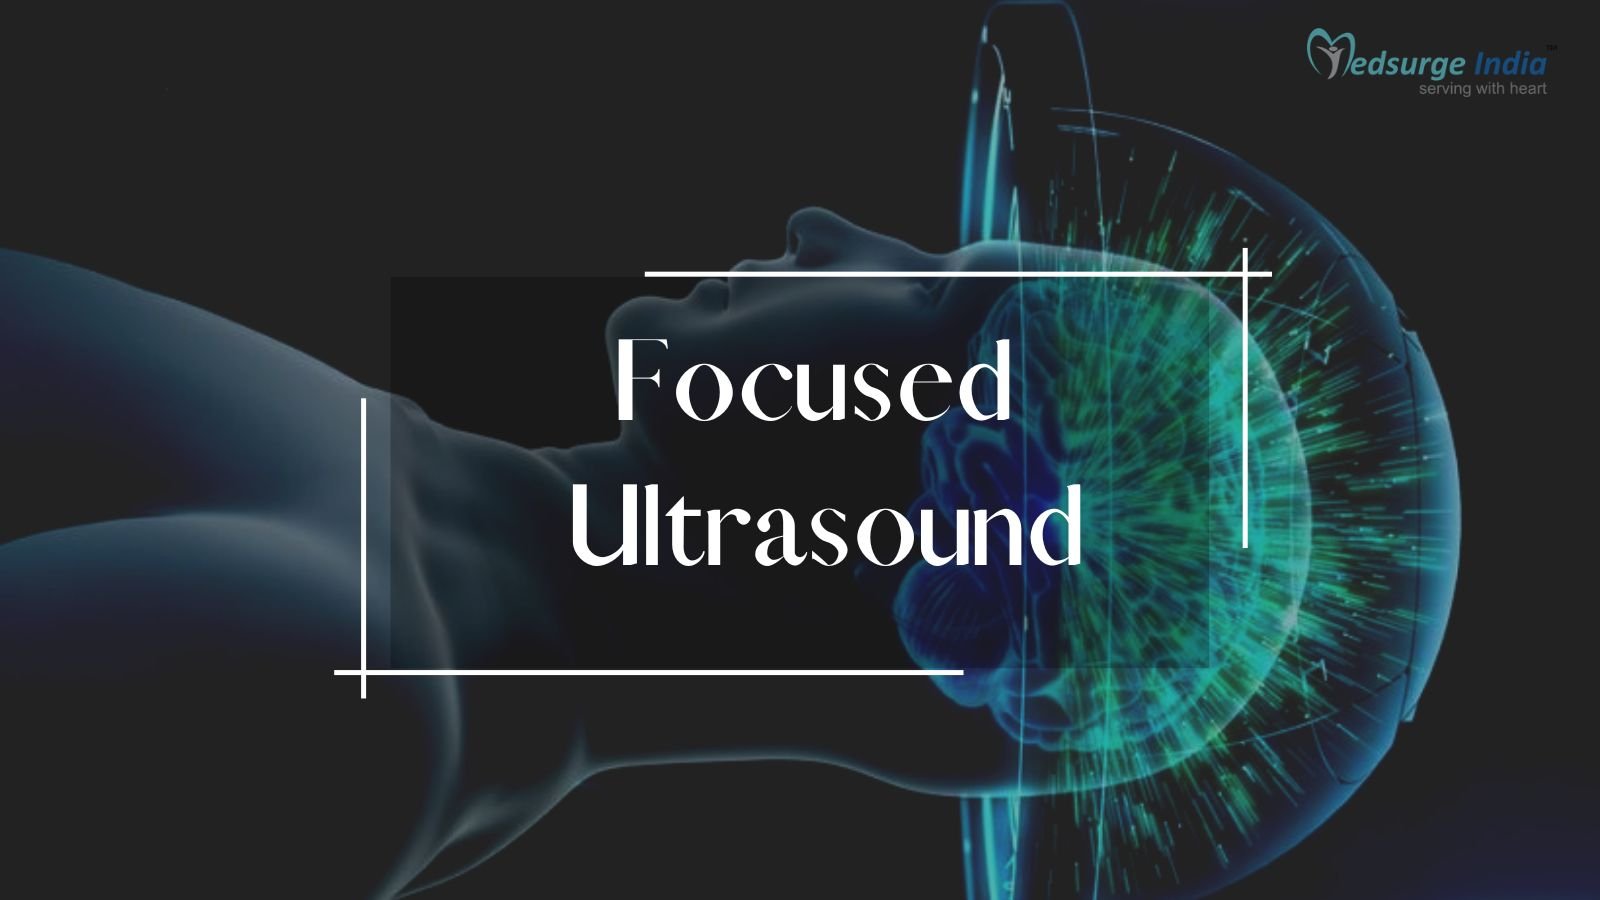 What is Focused Ultrasound